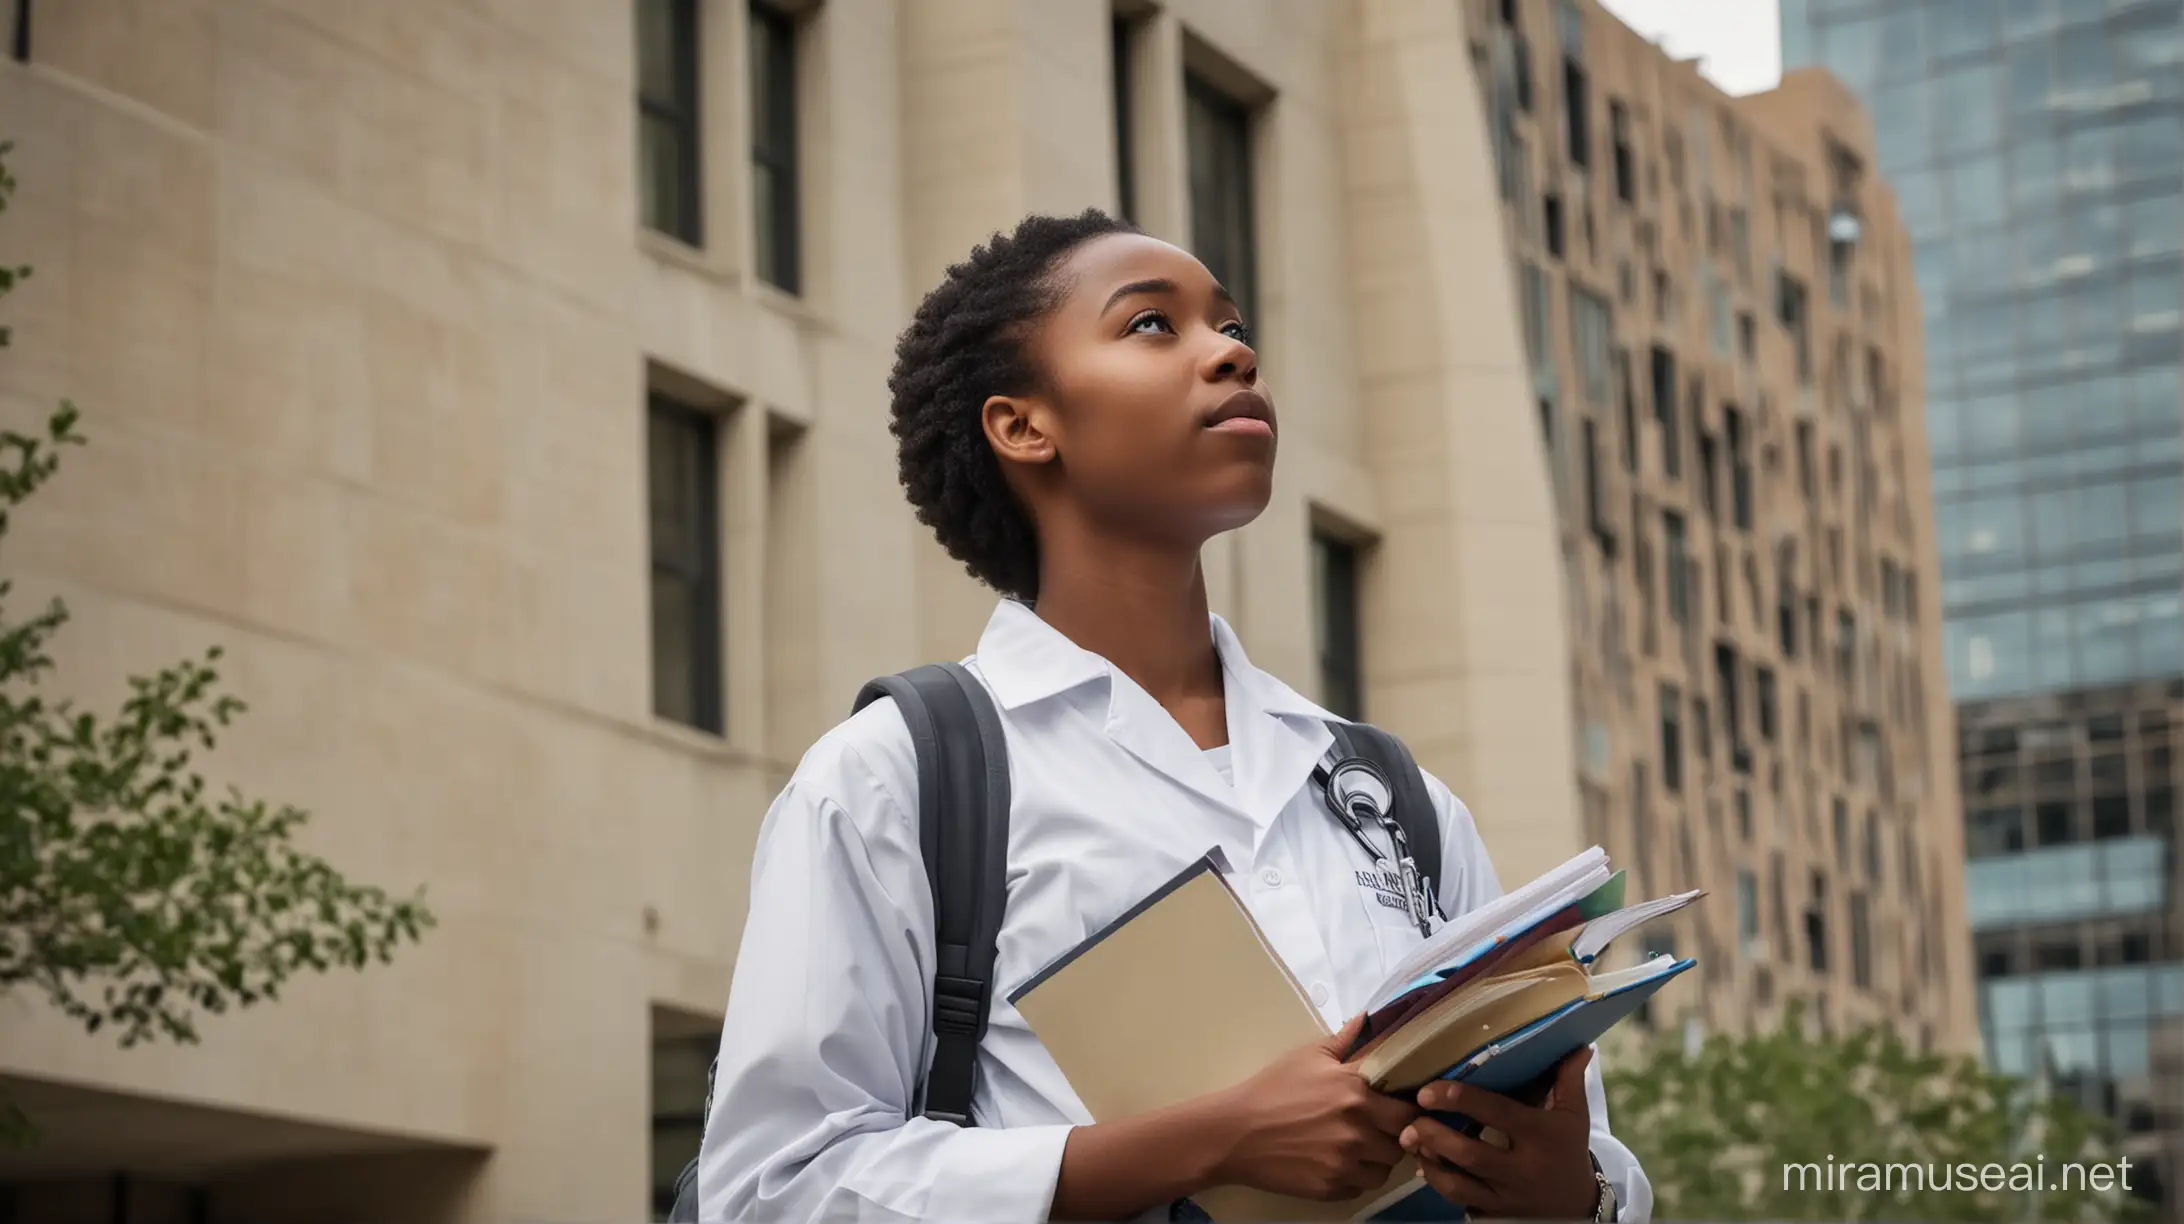 Standing outside the towering facade of a city medical center, an African American student gazes up with a mixture of awe and determination. Dressed in casual yet stylish attire, their expression is one of contemplation as they take in the impressive structure before them.

With a backpack slung over their shoulder and textbooks in hand, the student exudes an air of purpose and ambition, their eyes alight with the promise of knowledge and discovery. They stand tall and confident, ready to embark on their journey of learning and growth.

As they gaze at the medical center, the student imagines the countless lives that have been touched and transformed within its walls. Inspired by the possibility of making a difference in the world of healthcare, they feel a sense of excitement and anticipation for the challenges and opportunities that lie ahead.

In this moment of reflection, the African American student embraces the future with open arms, knowing that they have the passion and determination to pursue their dreams and make a meaningful impact in the world. With the city medical center as a symbol of their aspirations, they are ready to take the next step on their journey towards success and fulfillment.